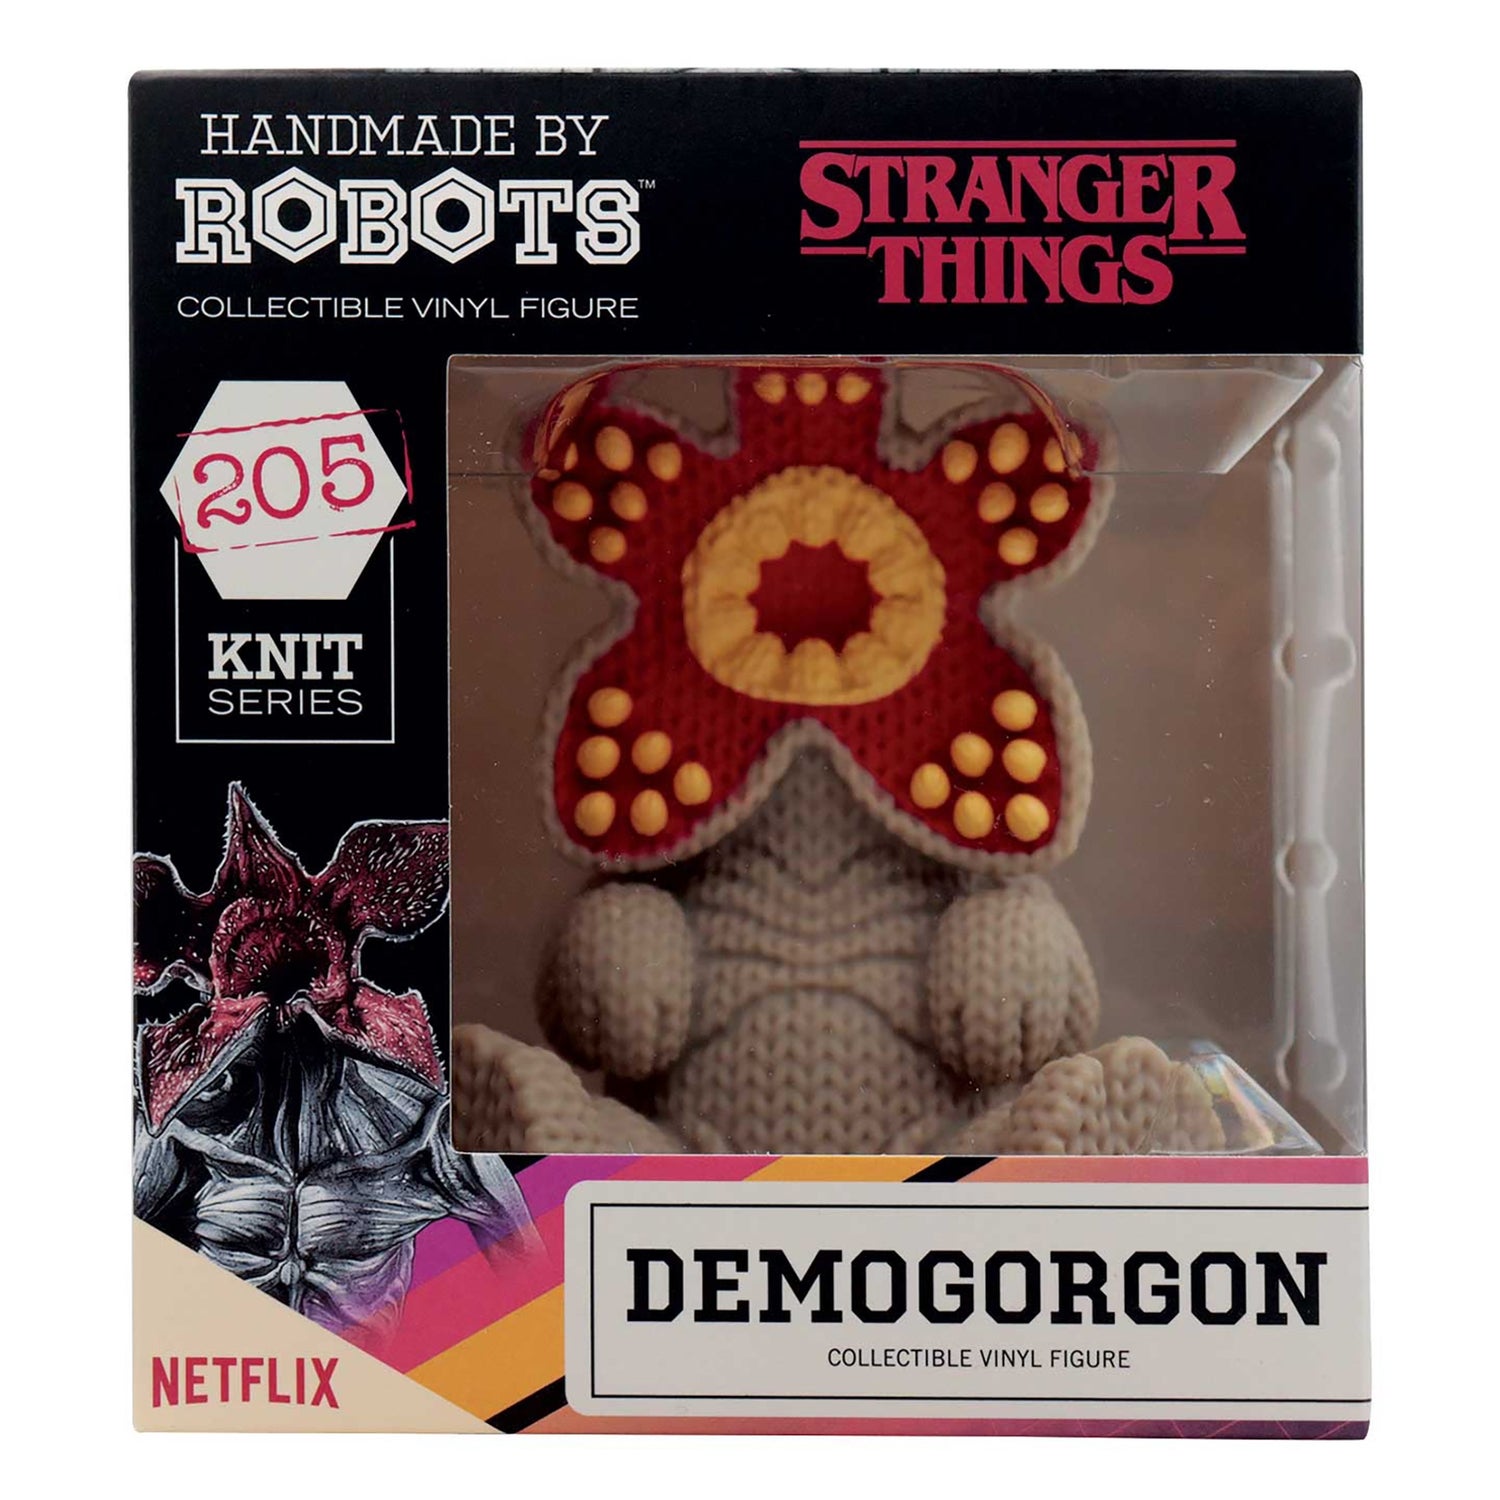 Stranger Things - Demogorgon Collectible Vinyl Figure from Handmade By Robots